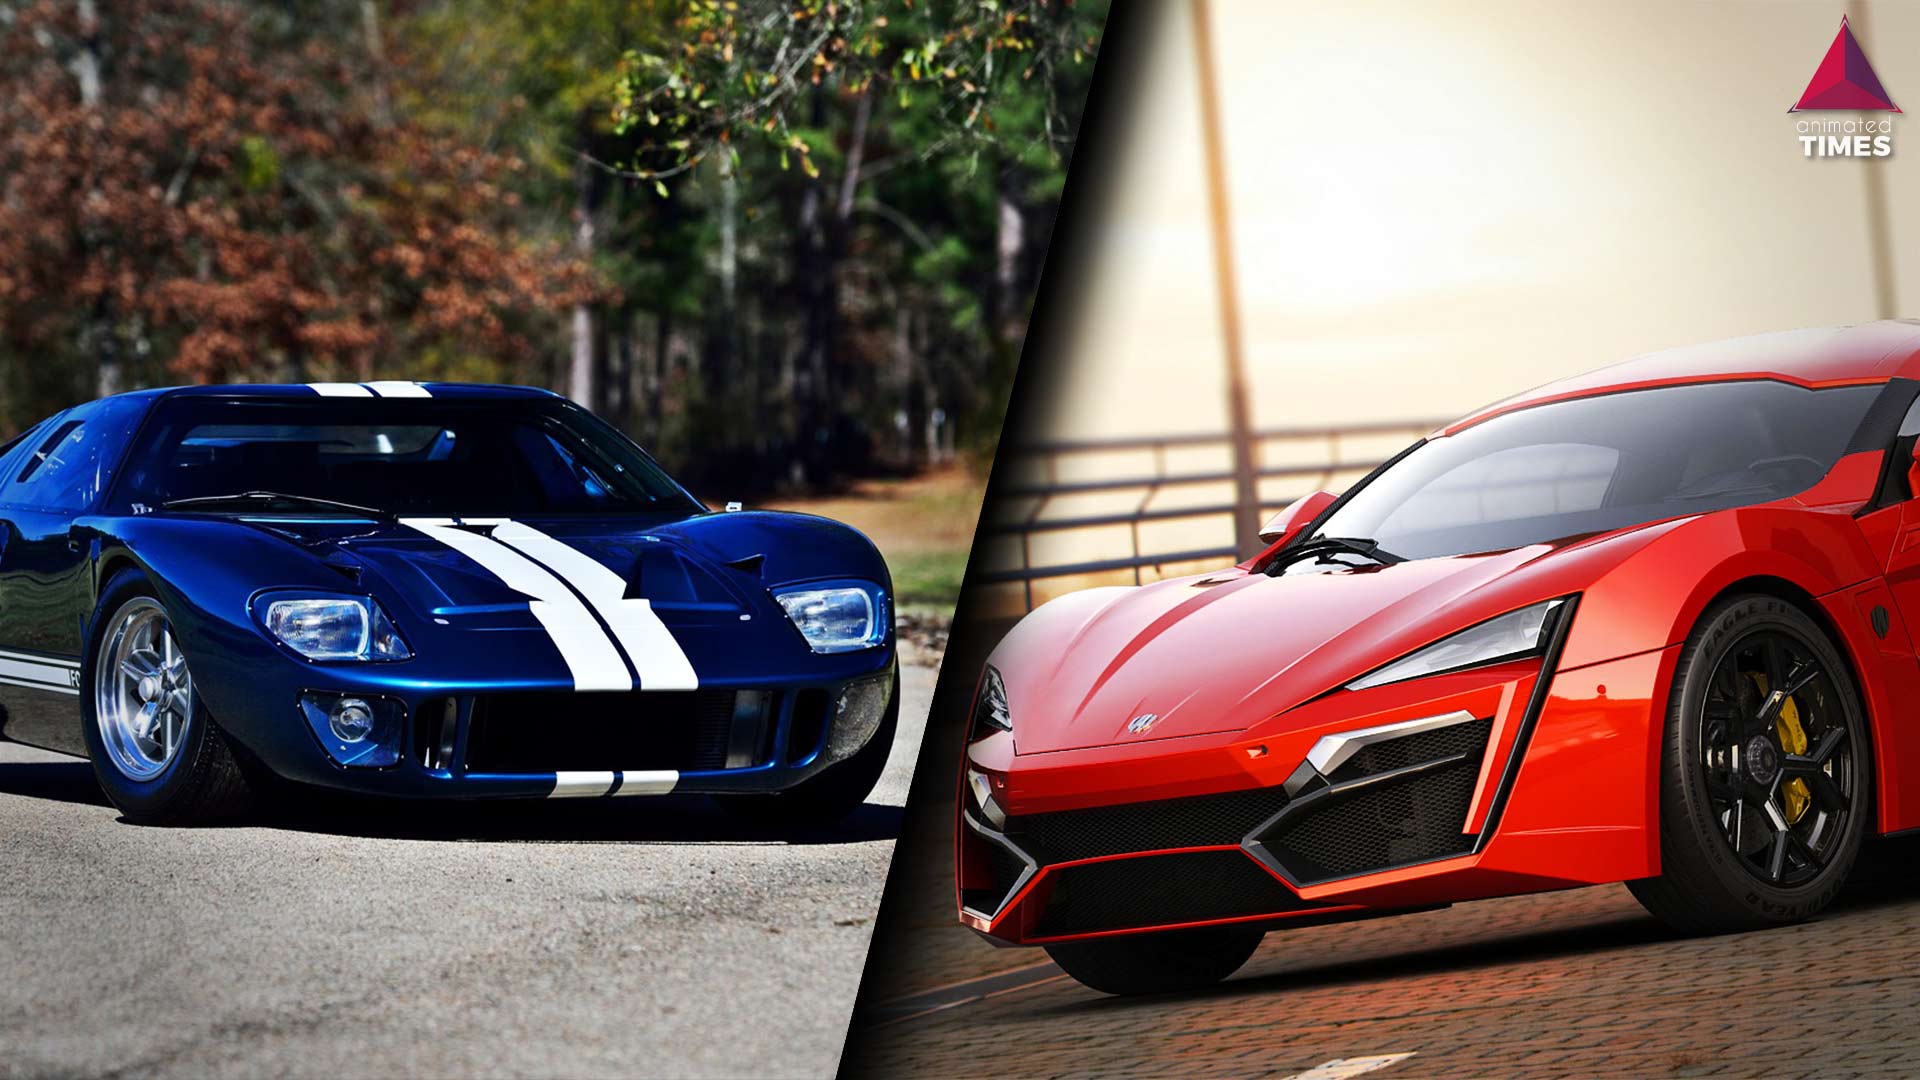 10 Most Expensive Cars of the Fast & Furious Franchise